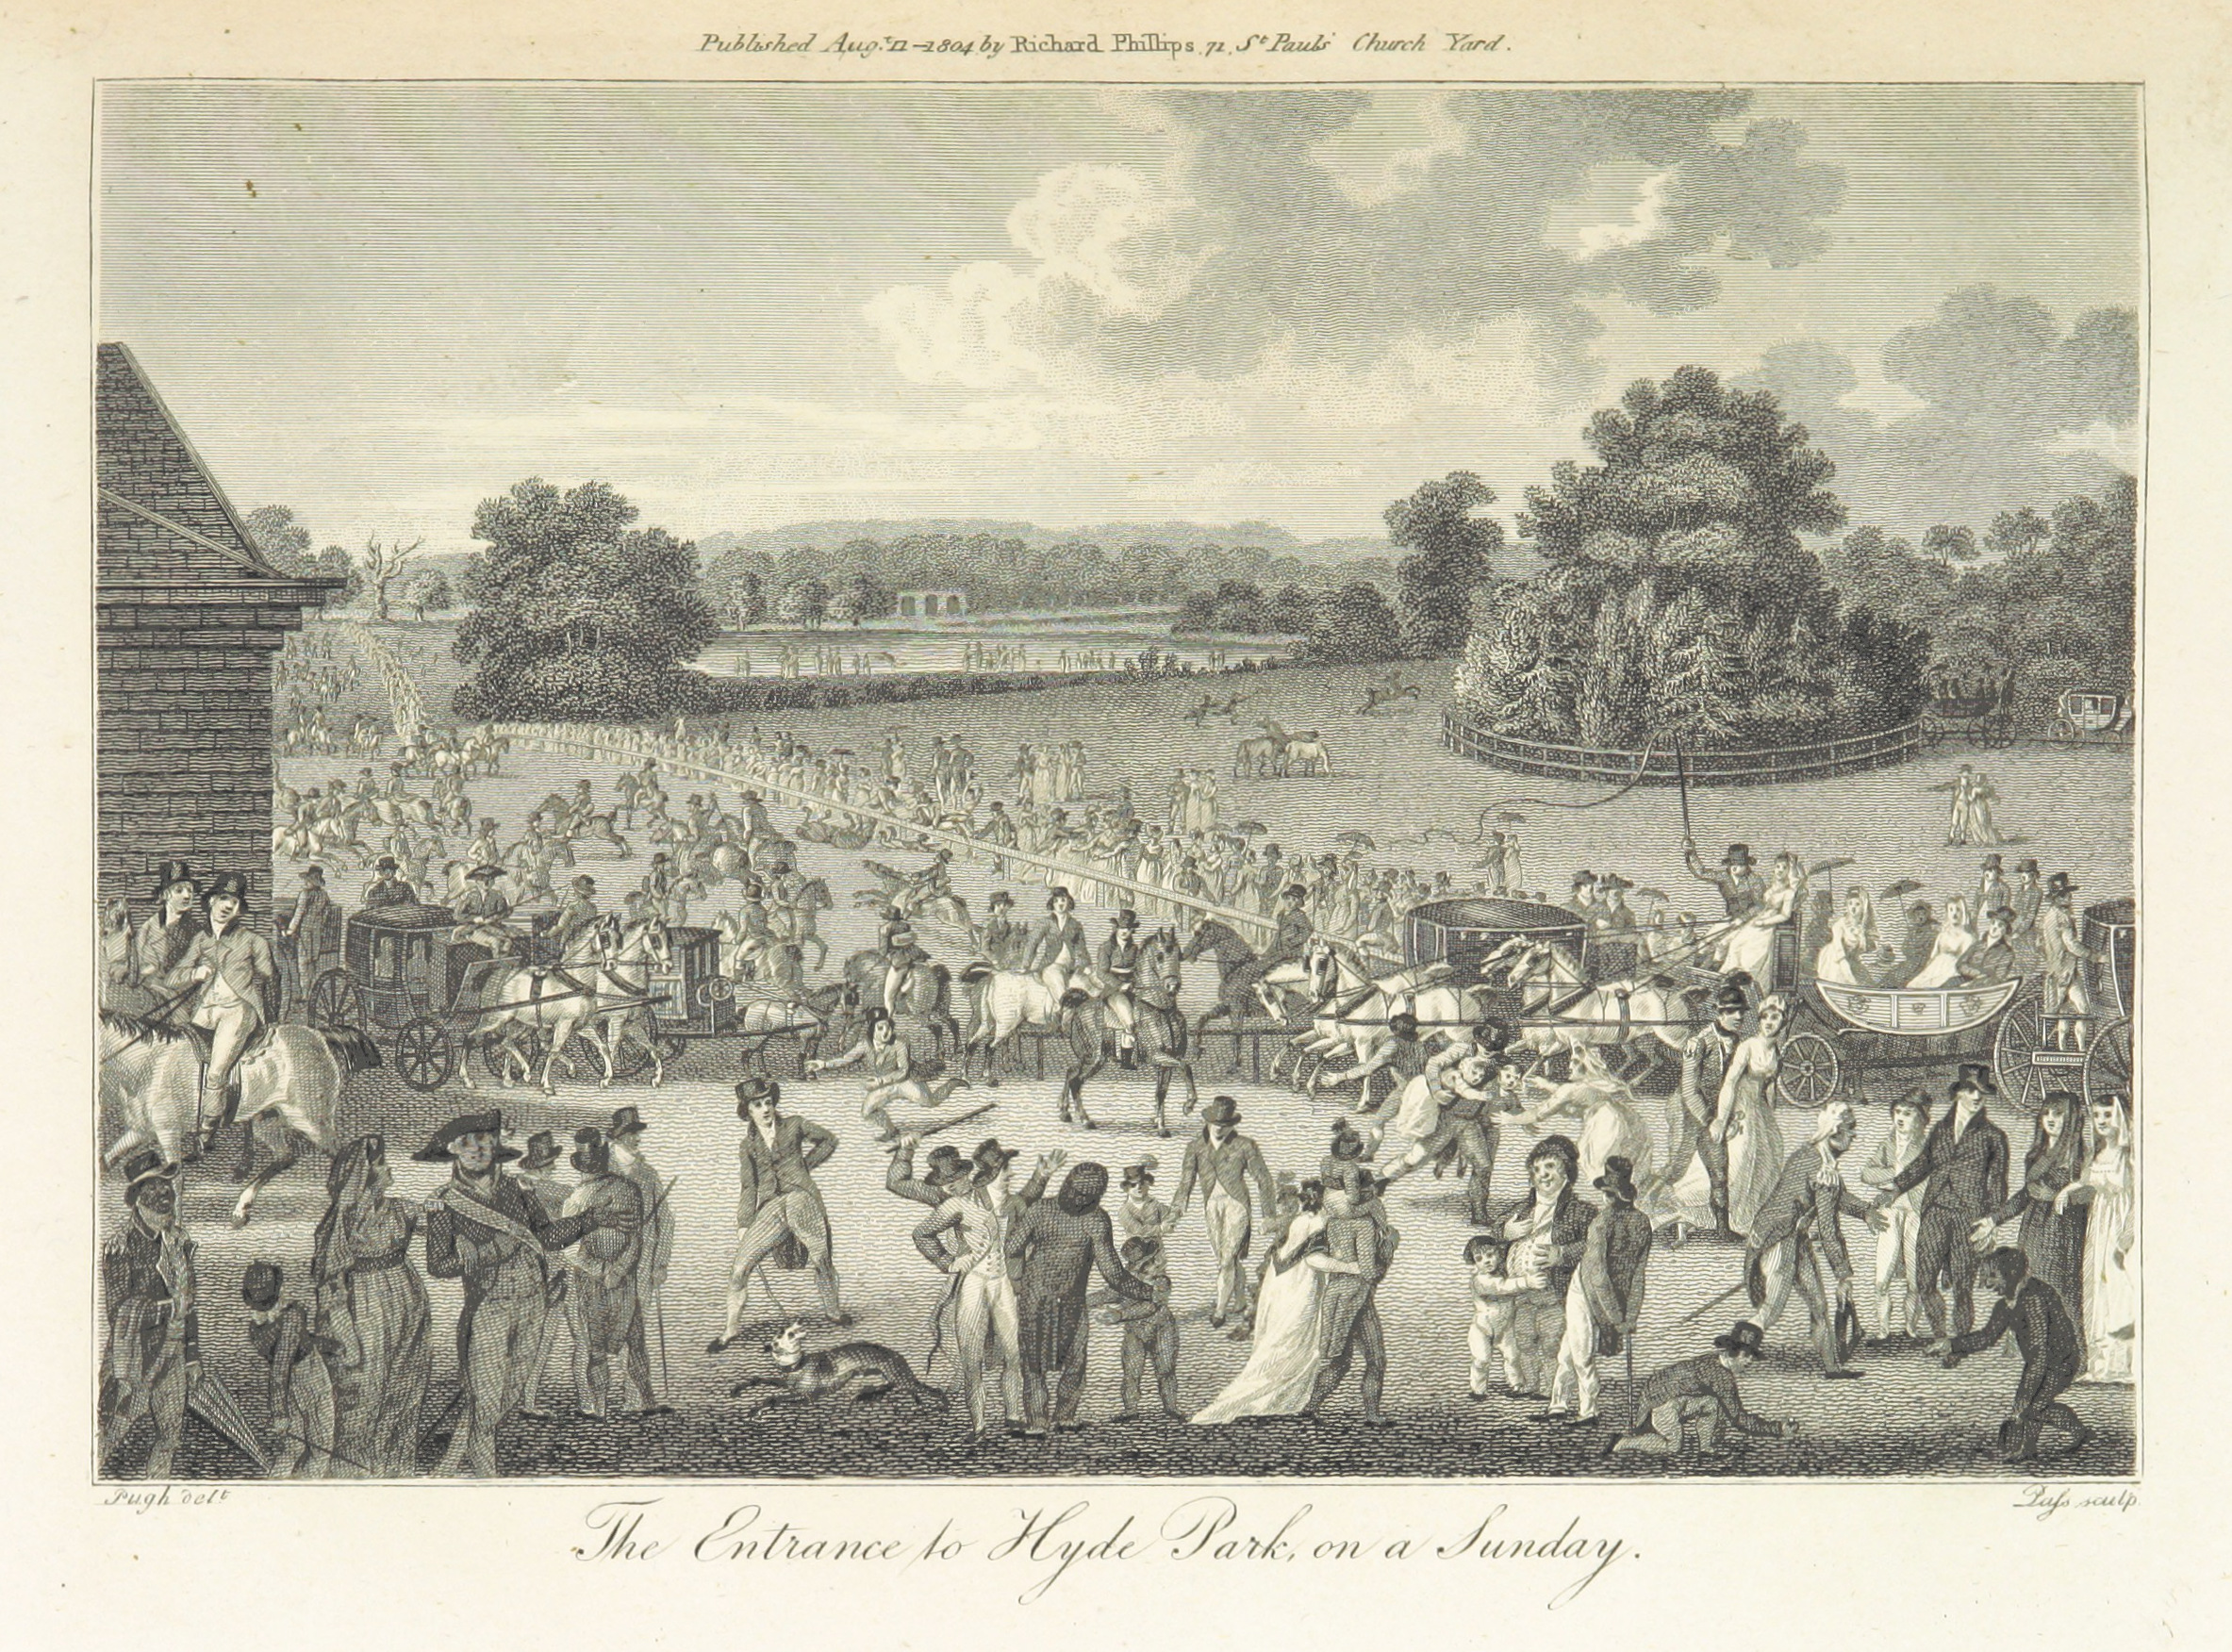 Phillips(1804)_p277_-_The_Entrance_to_Hyde_Park_on_Sunday